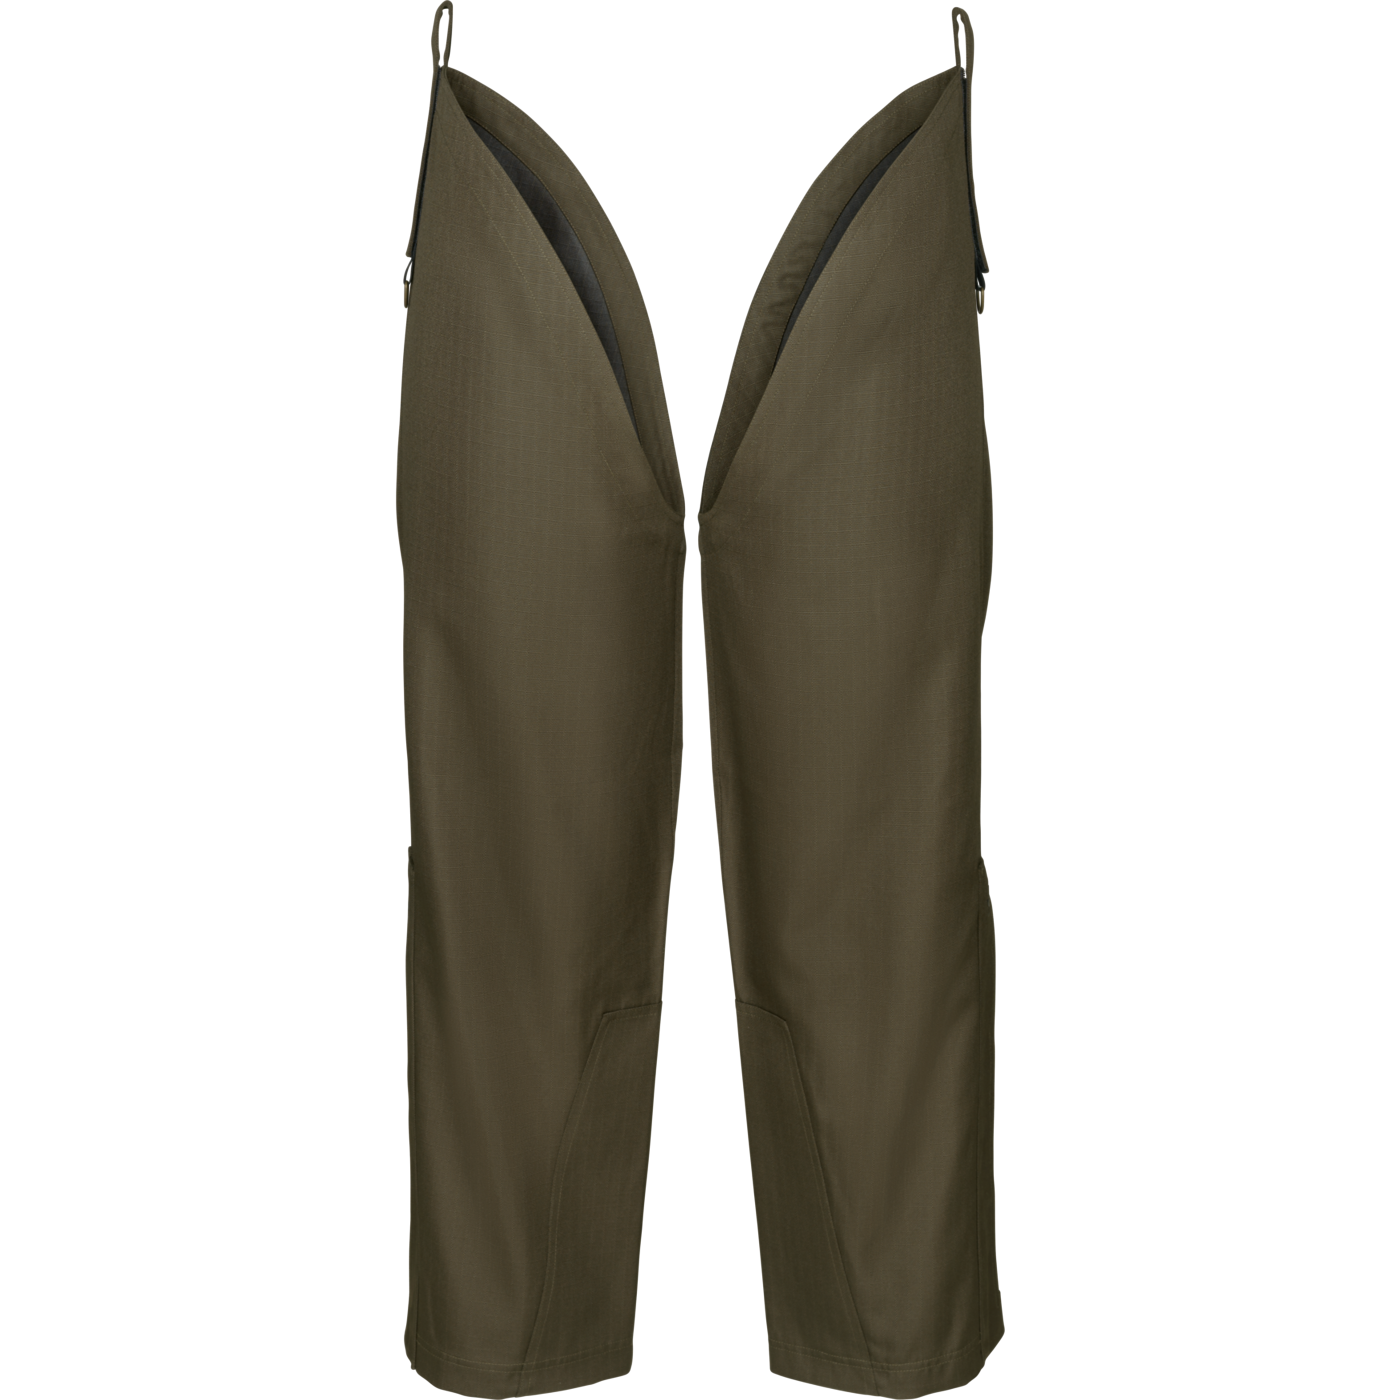 Buckthorn Chaps Shaded Olive